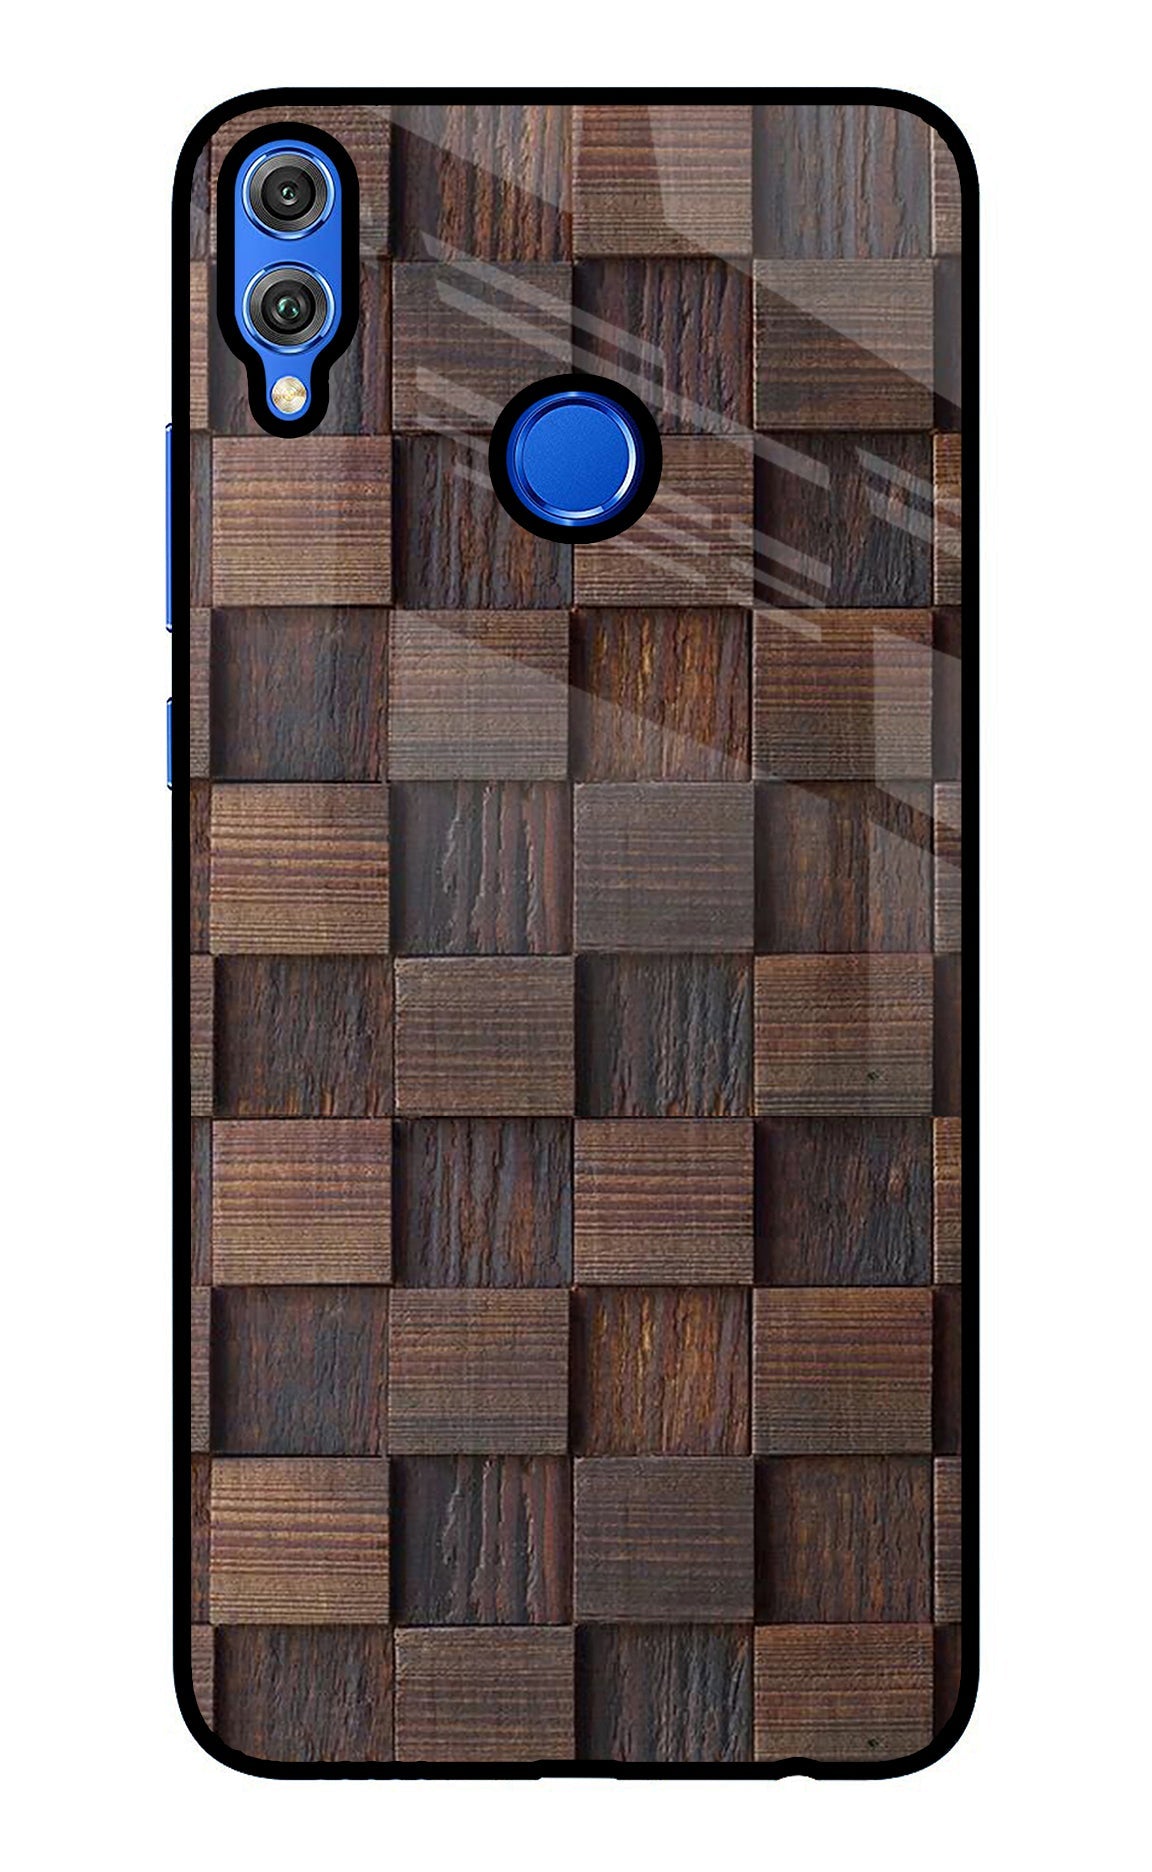 Wooden Cube Design Honor 8X Glass Case